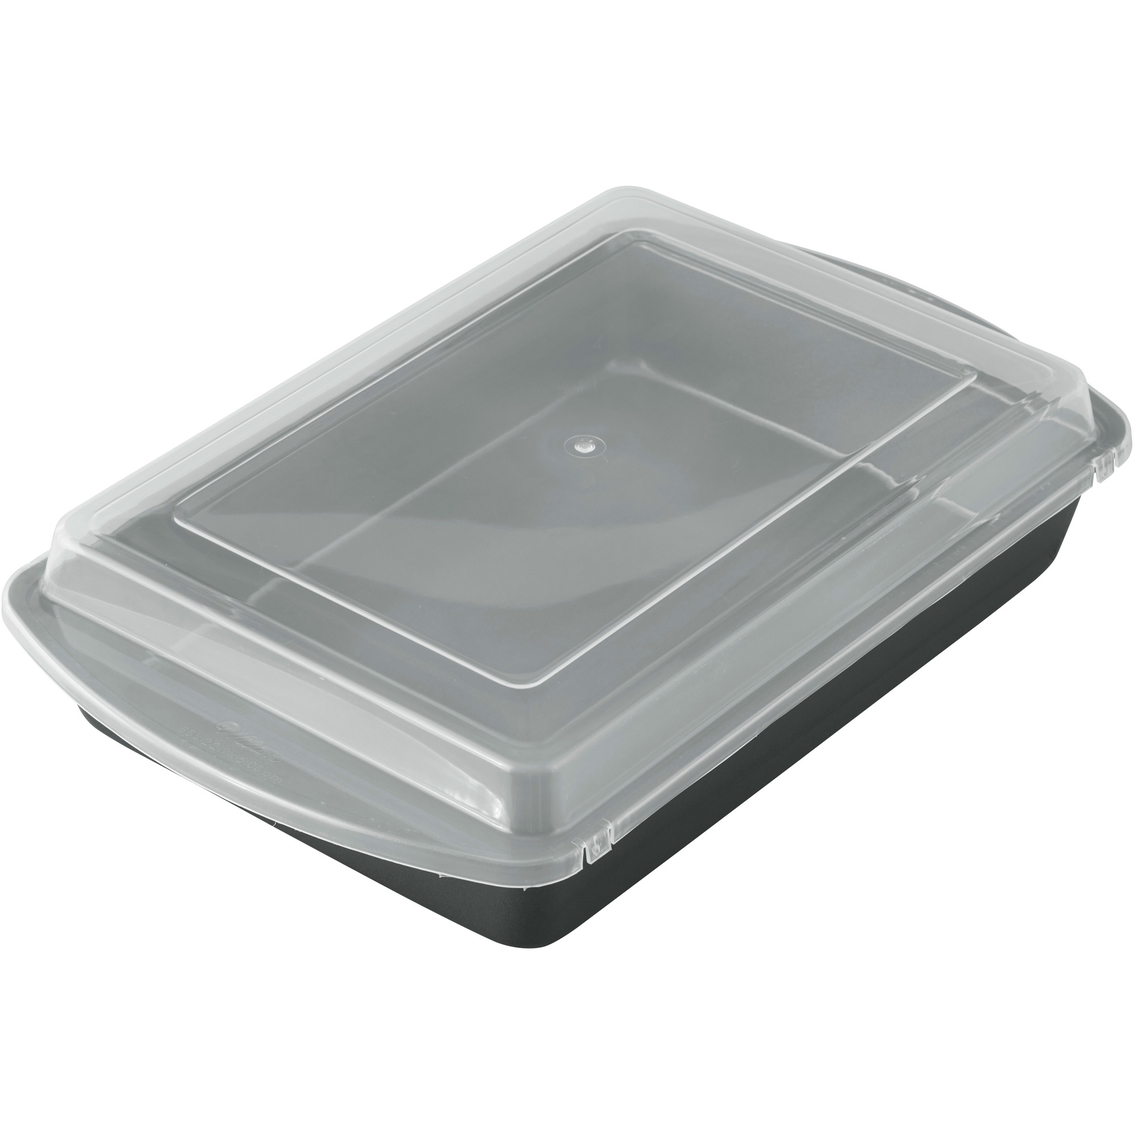 Wilton Perfect Results 13 x 9 Oblong Cake Pan with Cover - Image 4 of 4